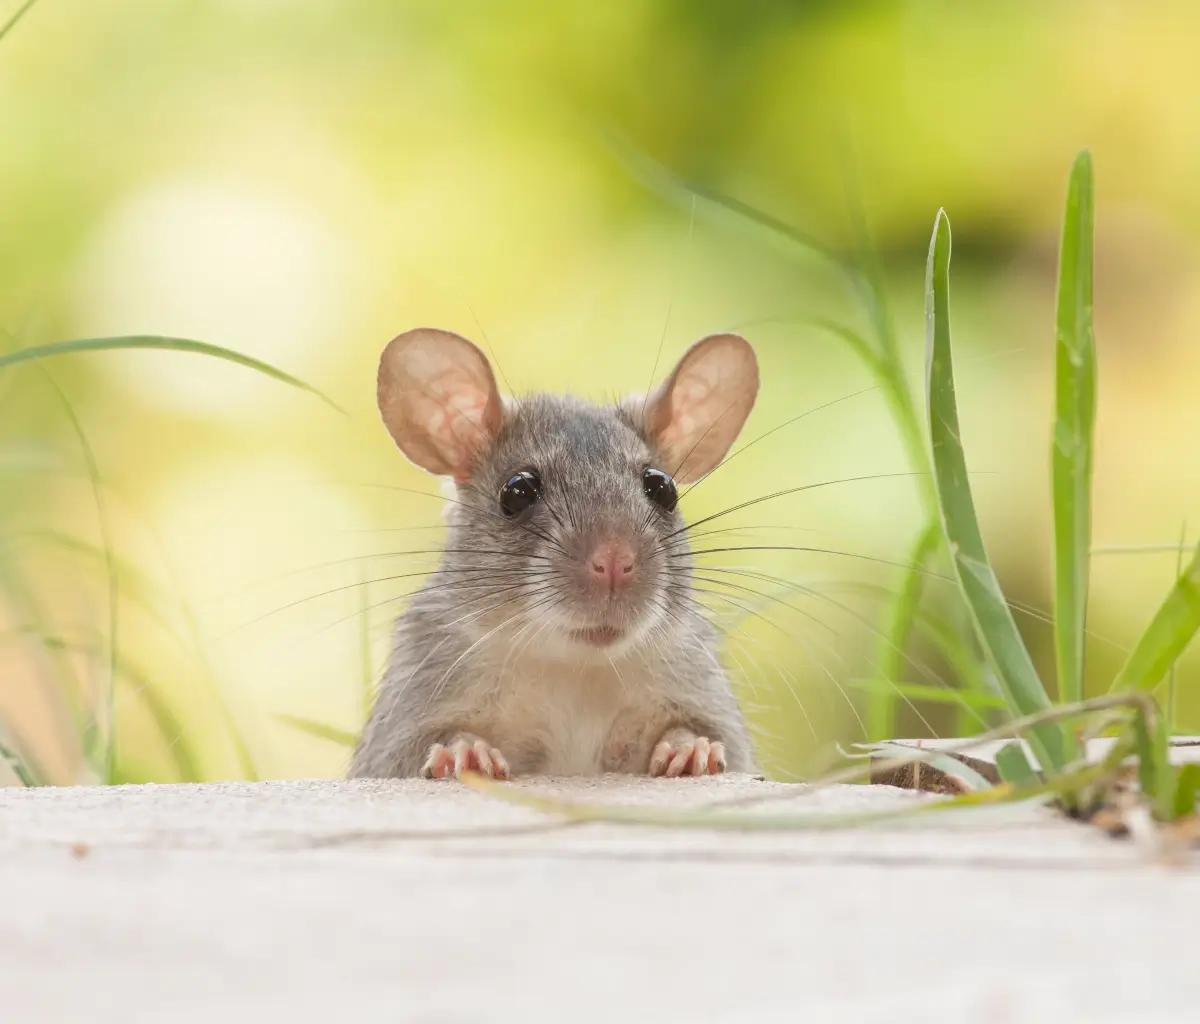 Rodent Control  Rodent Extermination & Exclusion Services For